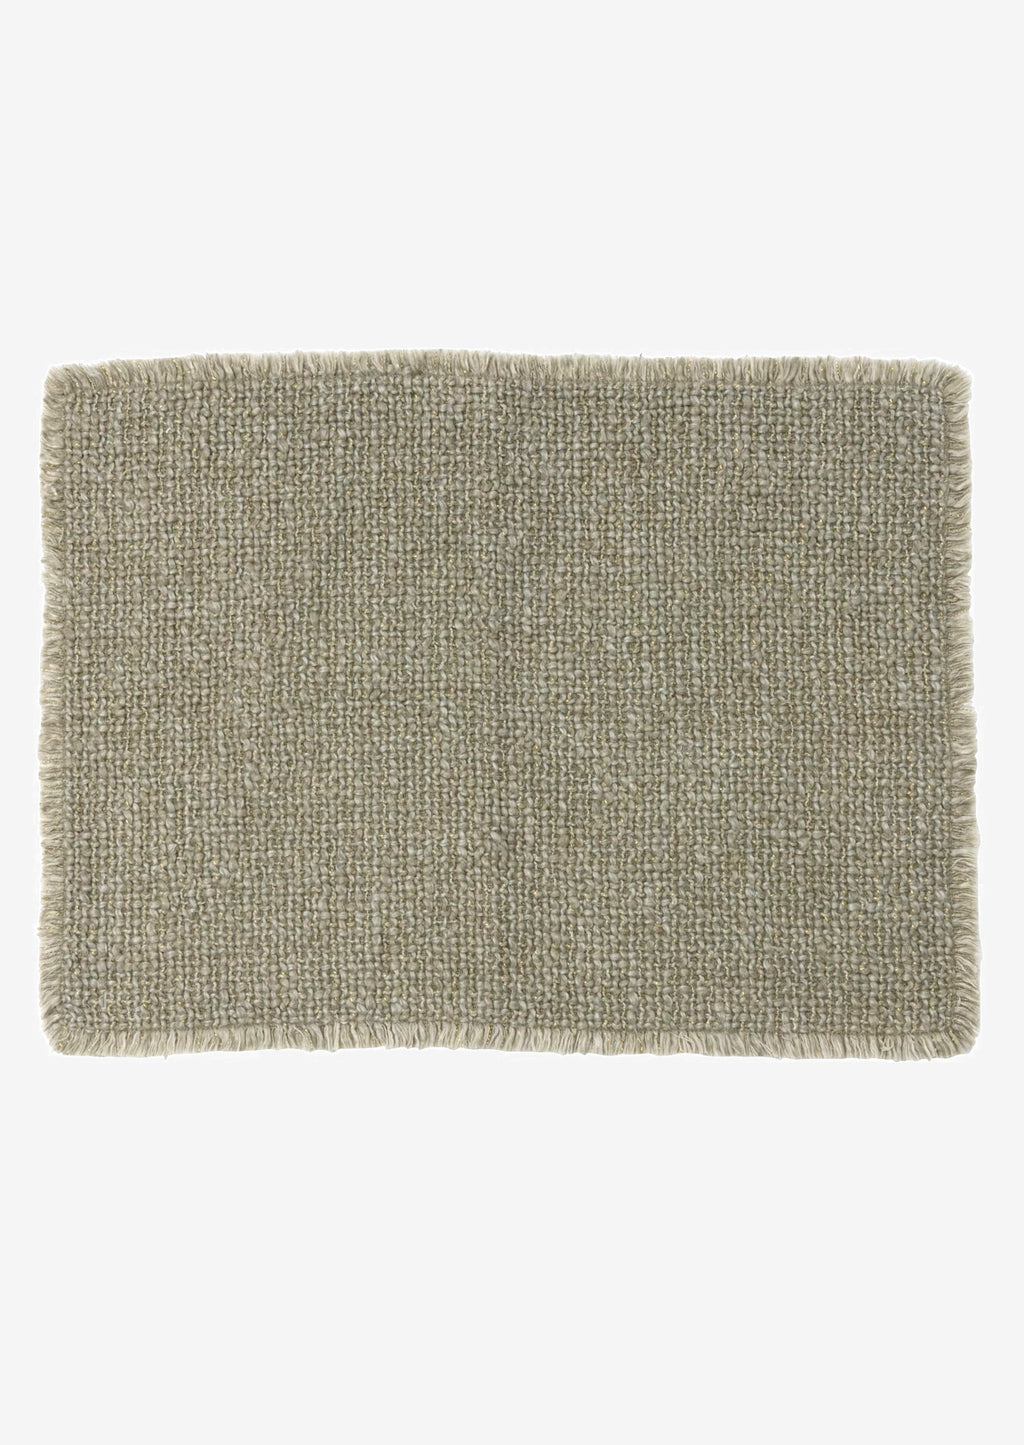 2: A sage green placemat with fringe edges.